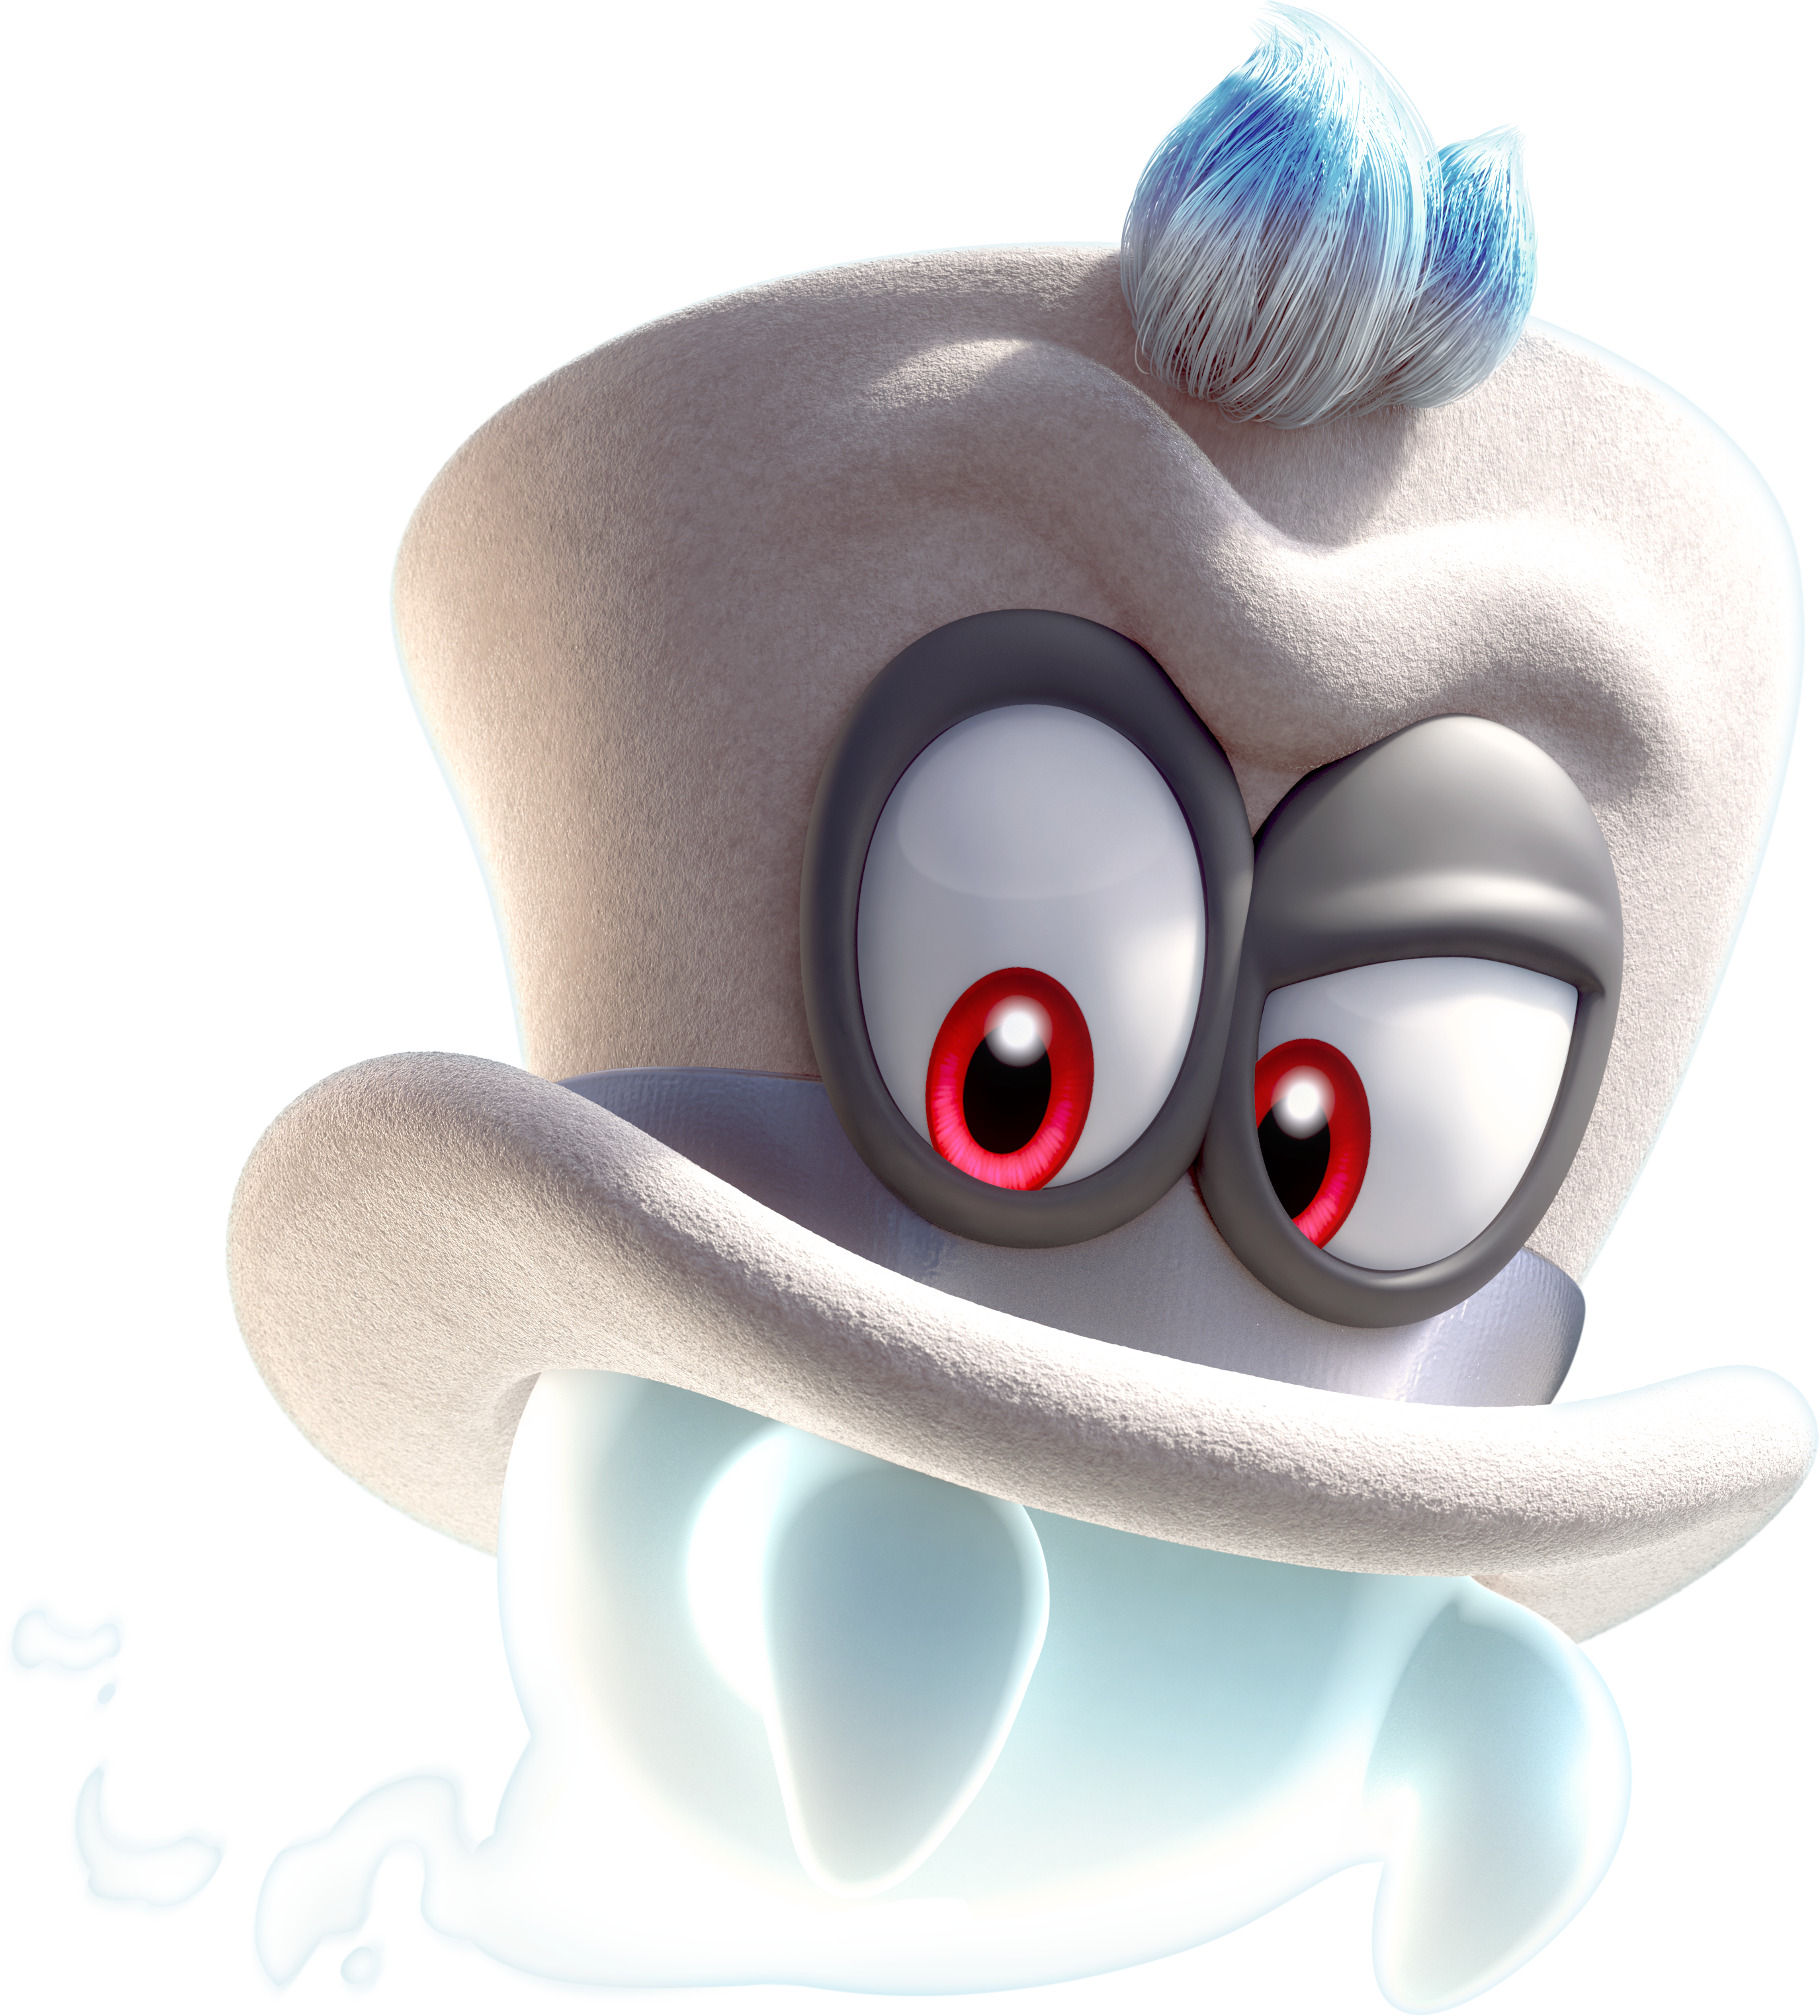 Super Mario Odyssey has co-op, will let you play as Mario's hat